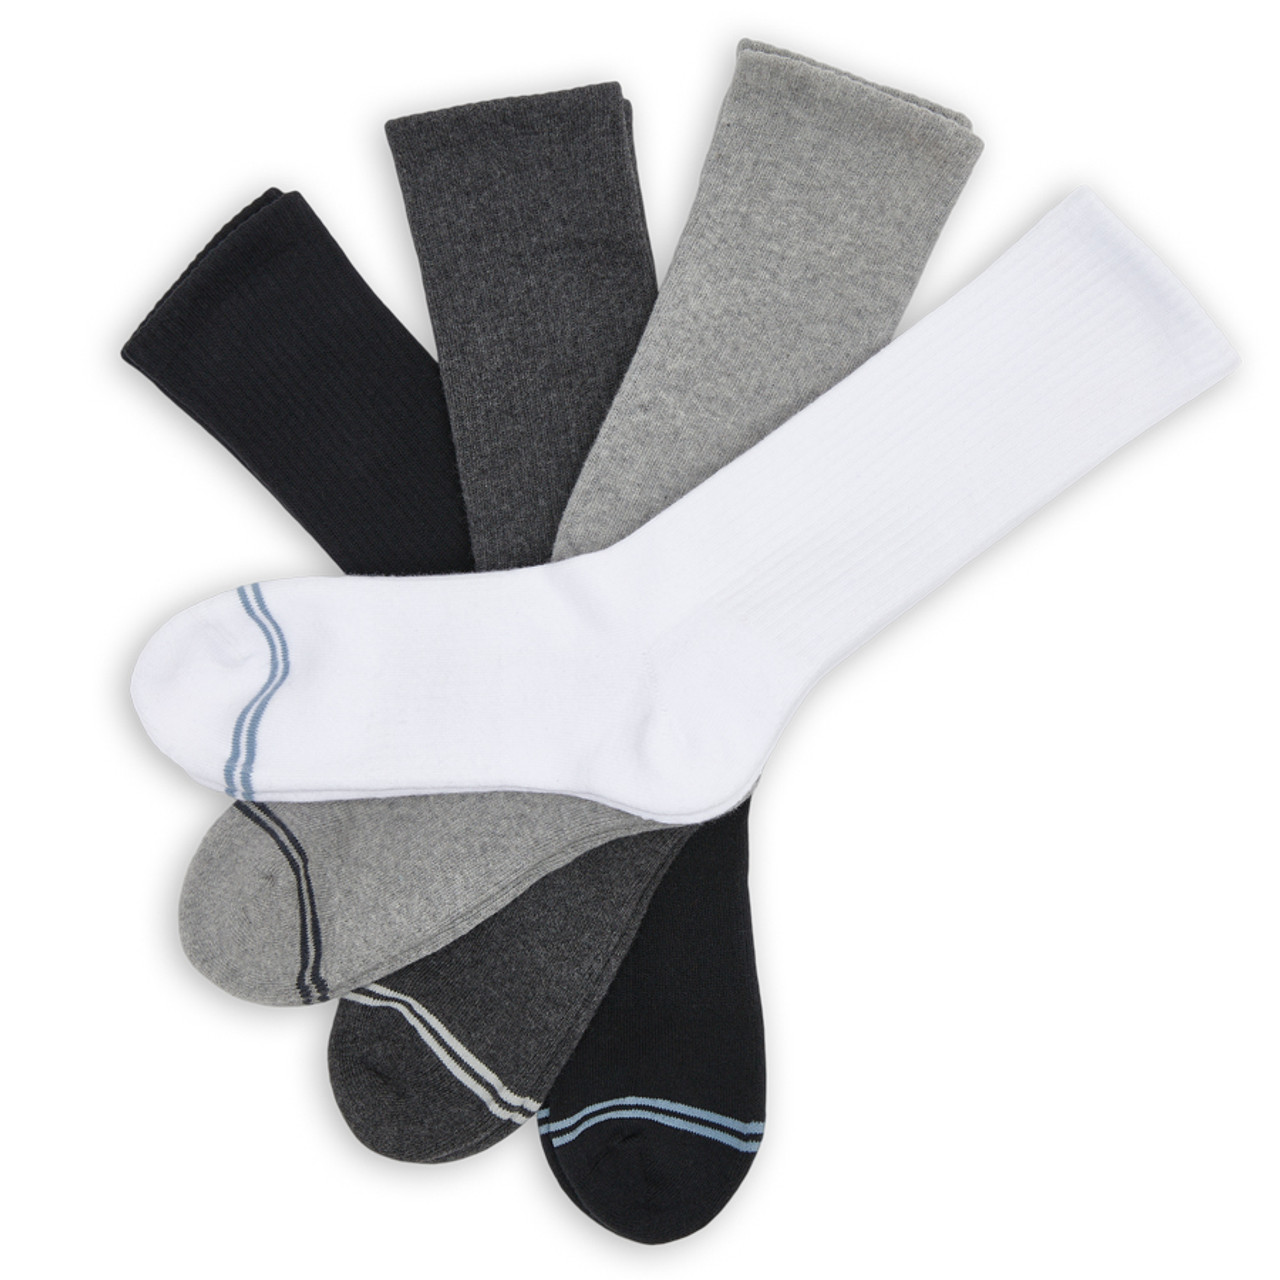 Casual Crew Socks 4-Pack, Essential Shades for Daily Wear